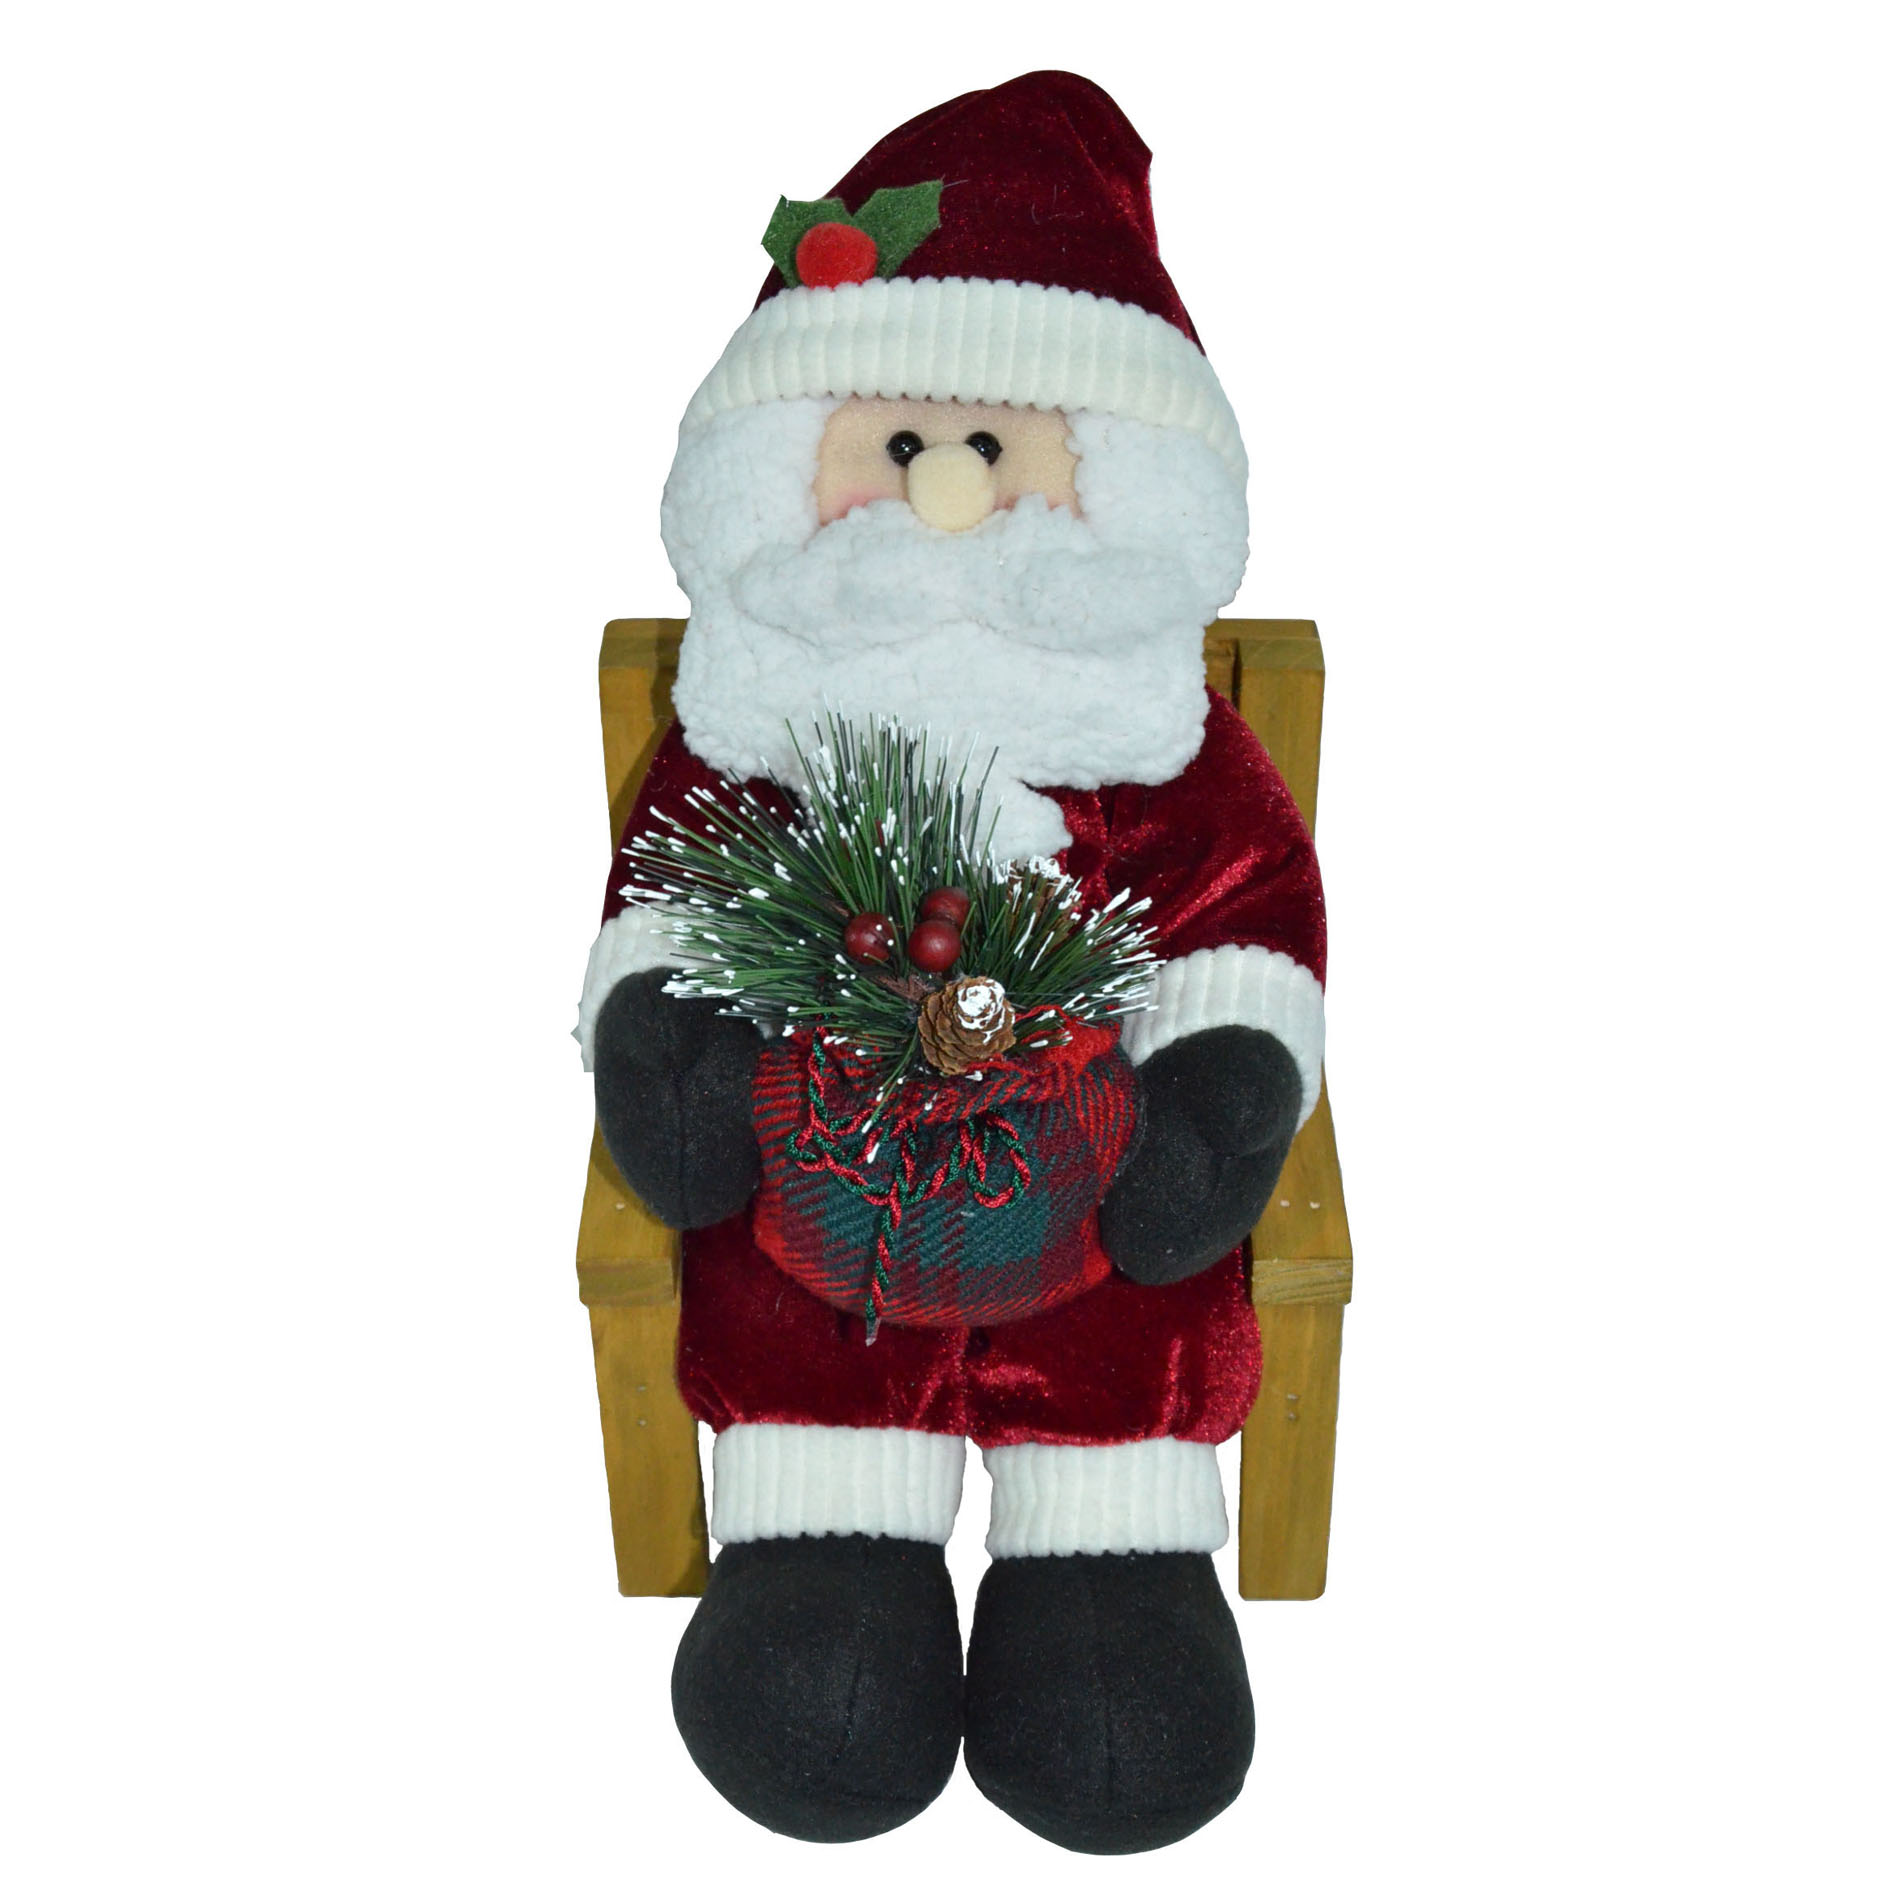 Trimming Traditions 11.5" Fabric Santa Character on Wood Chair